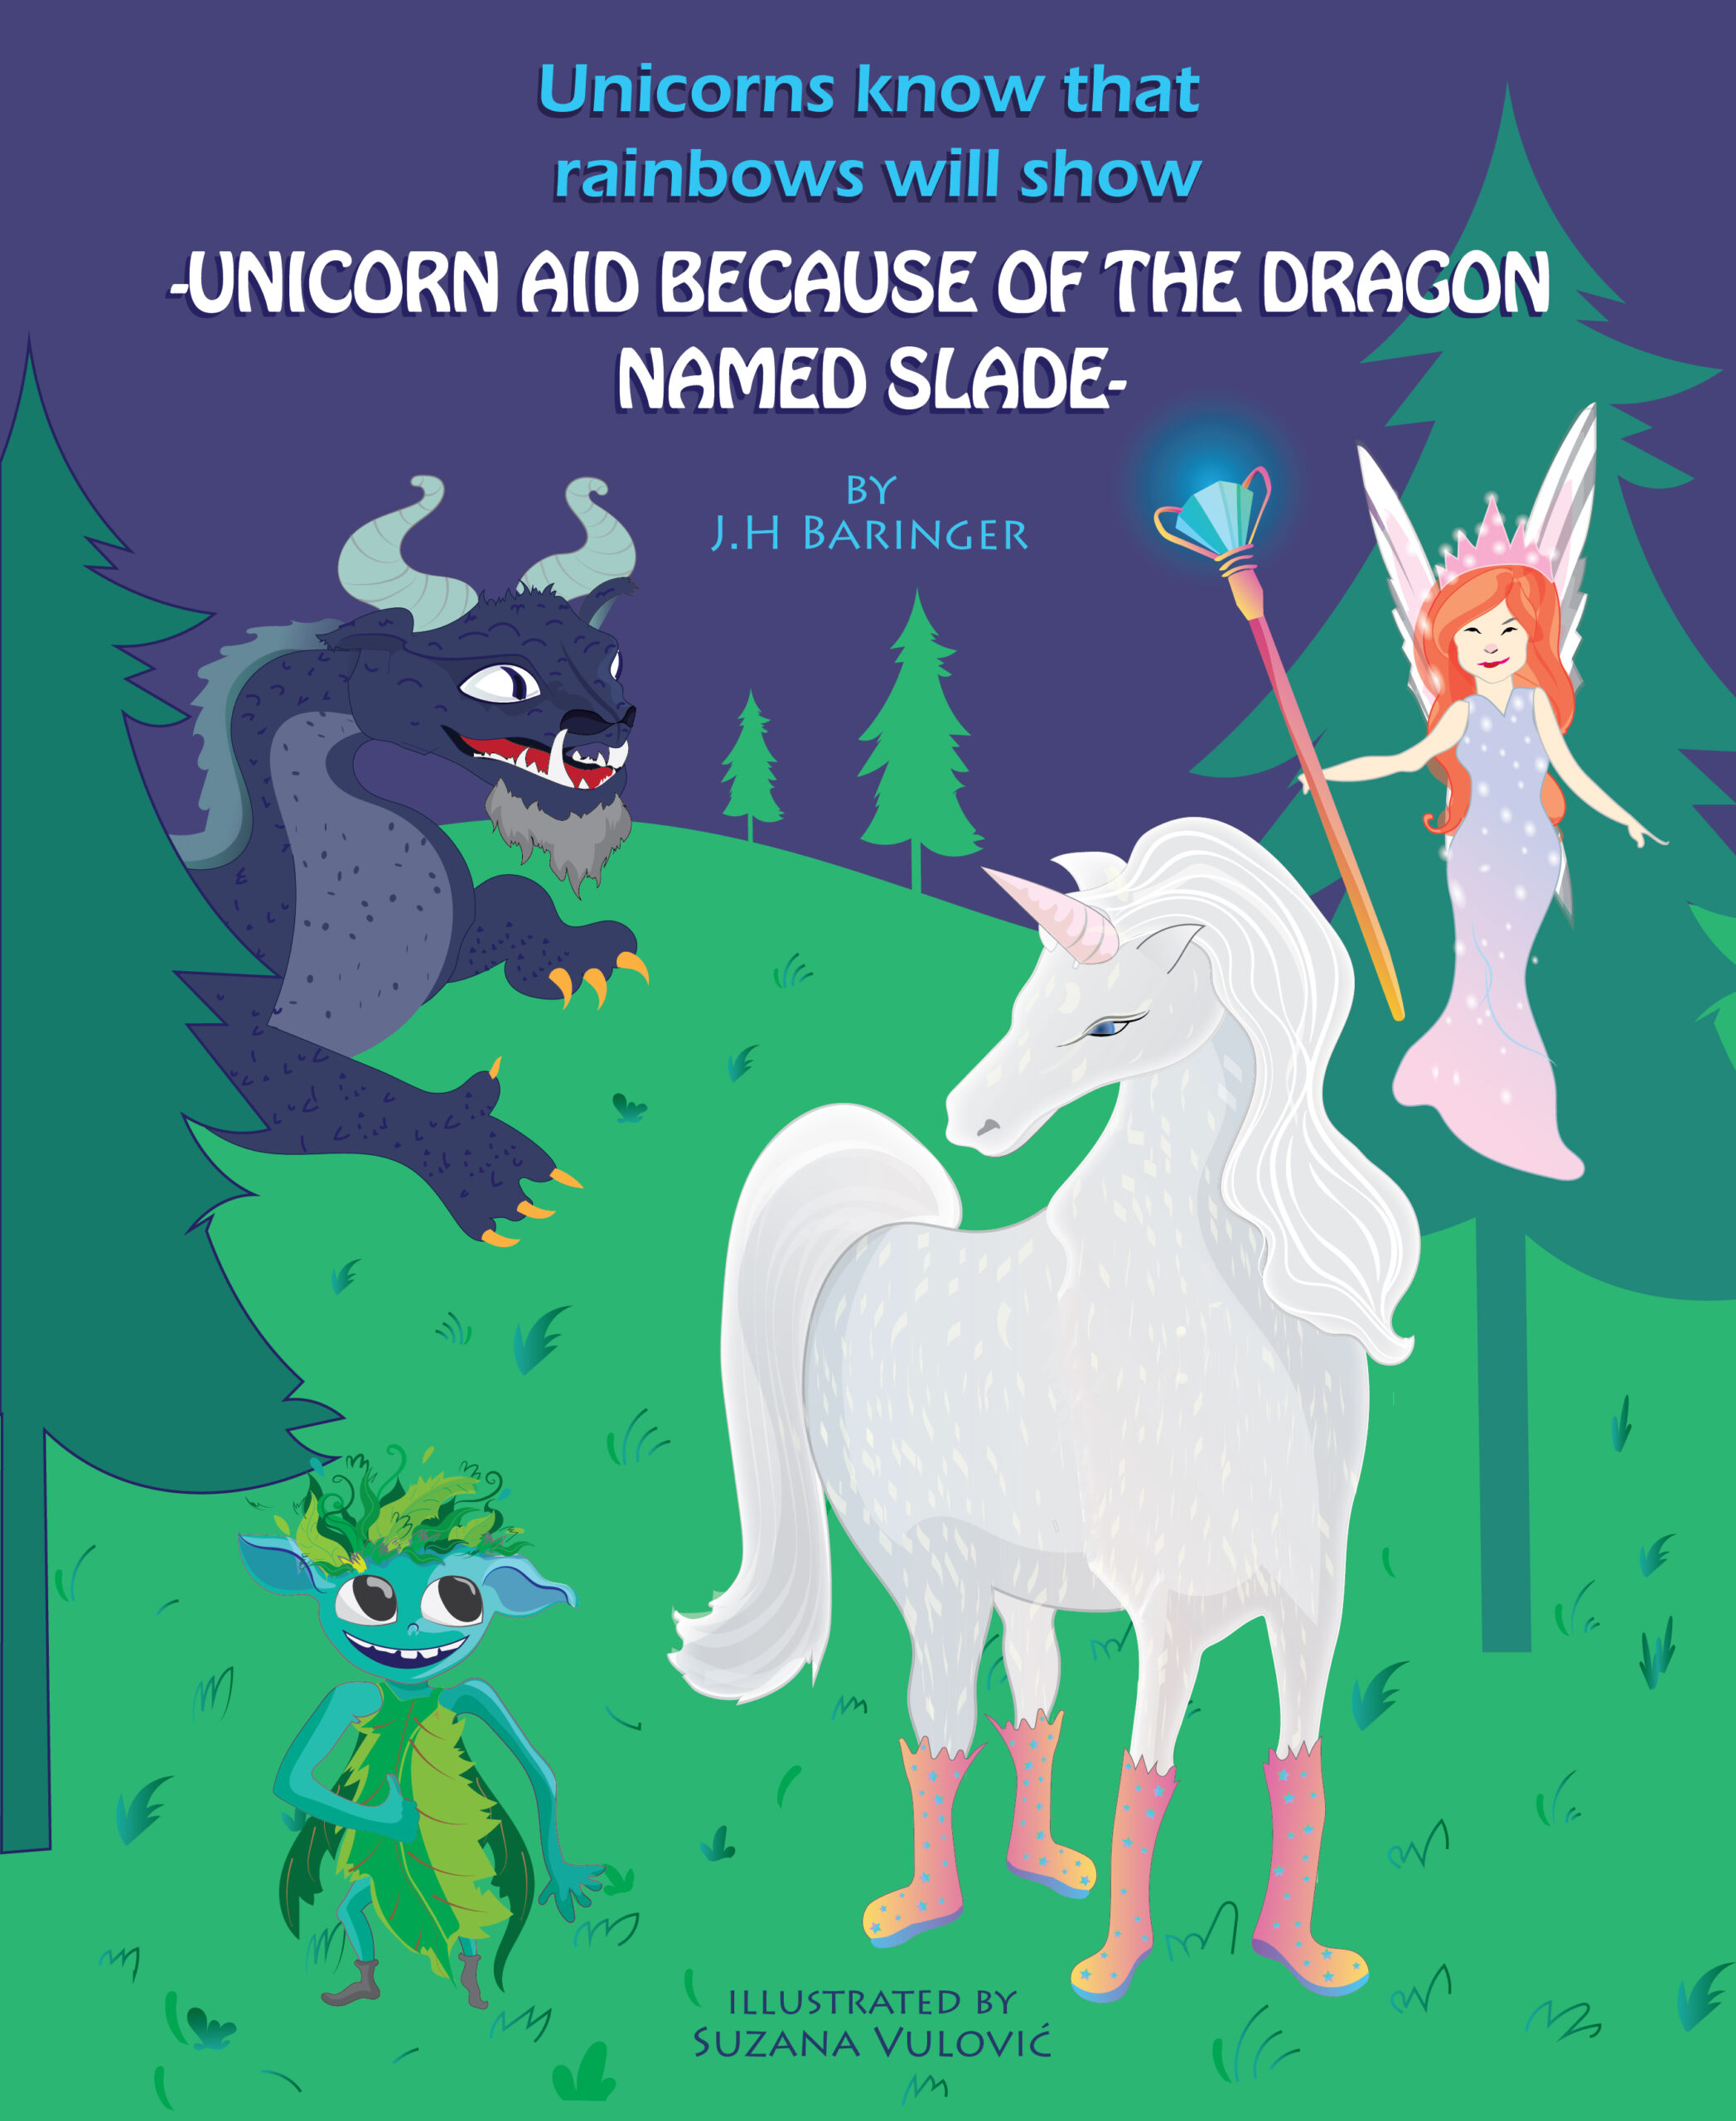 FREE: Unicorns know that rainbows will show: unicorn aid because of the dragon named Slade by J.H Baringer